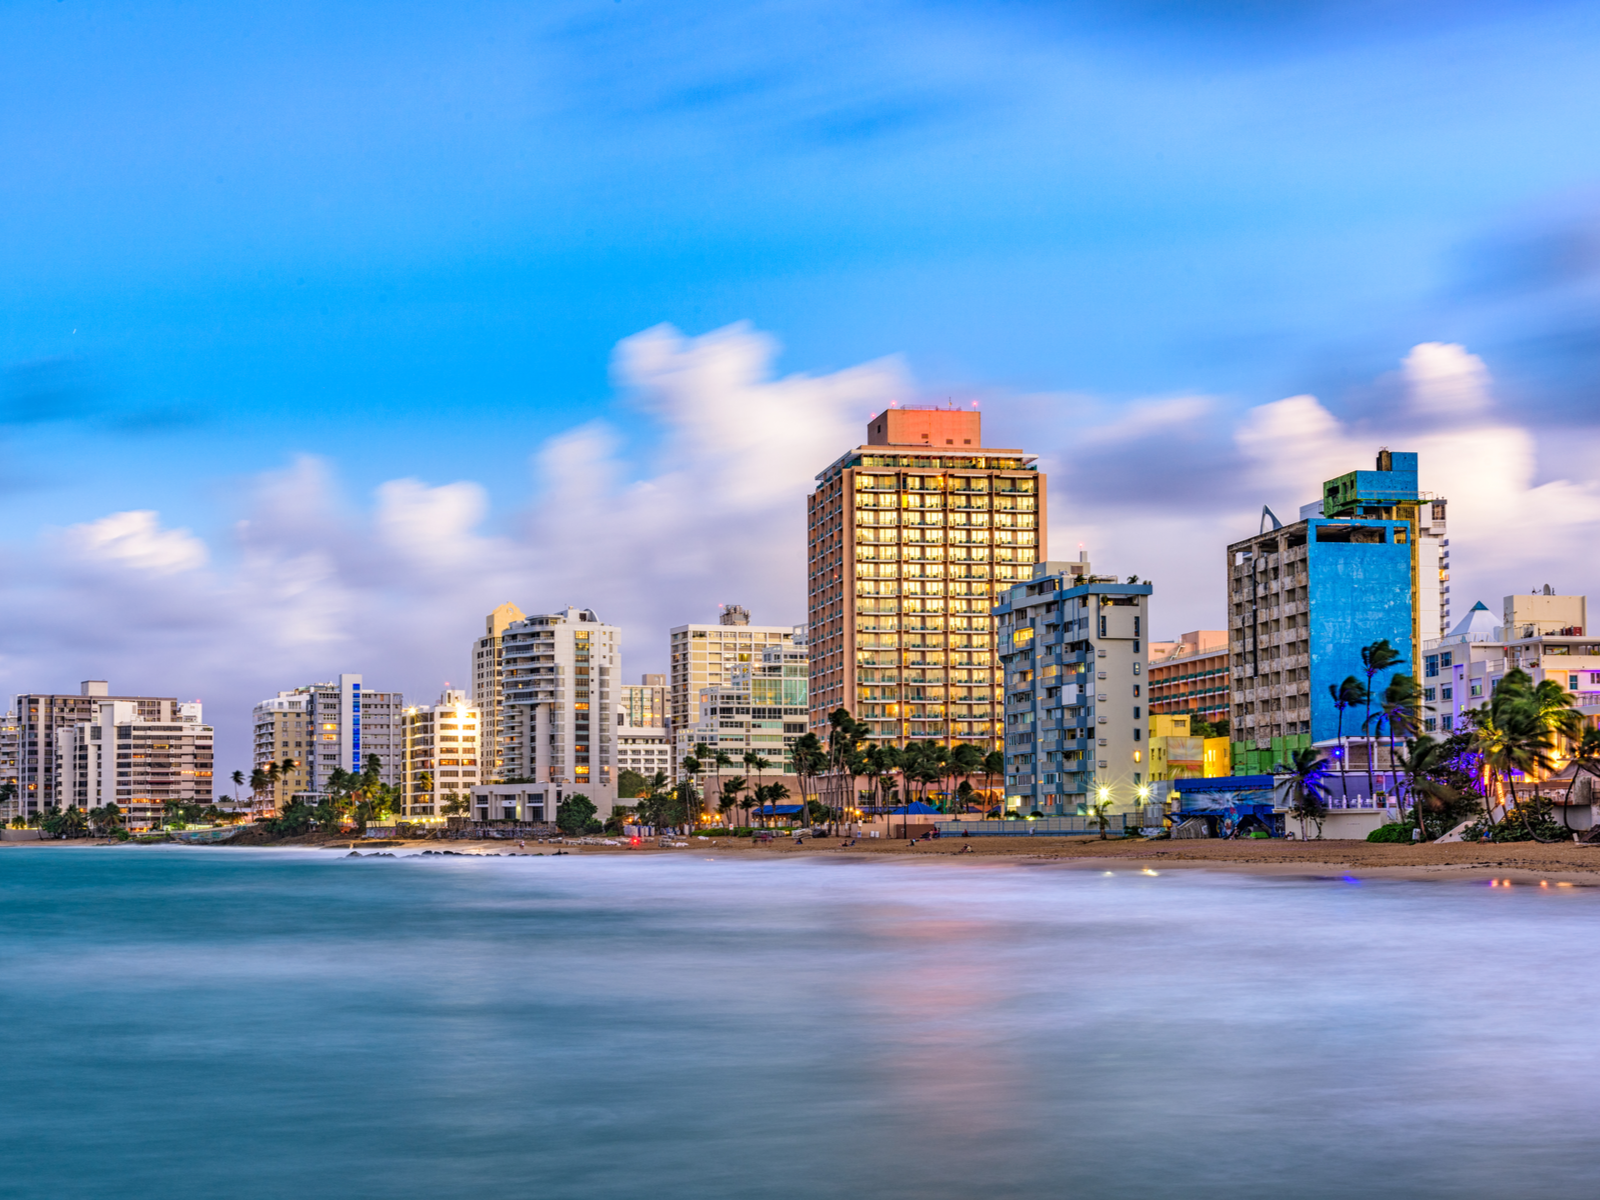 A rich district with huge resorts and hotels near the coast at Condado, a piece on the best places to visit in Puerto Rico